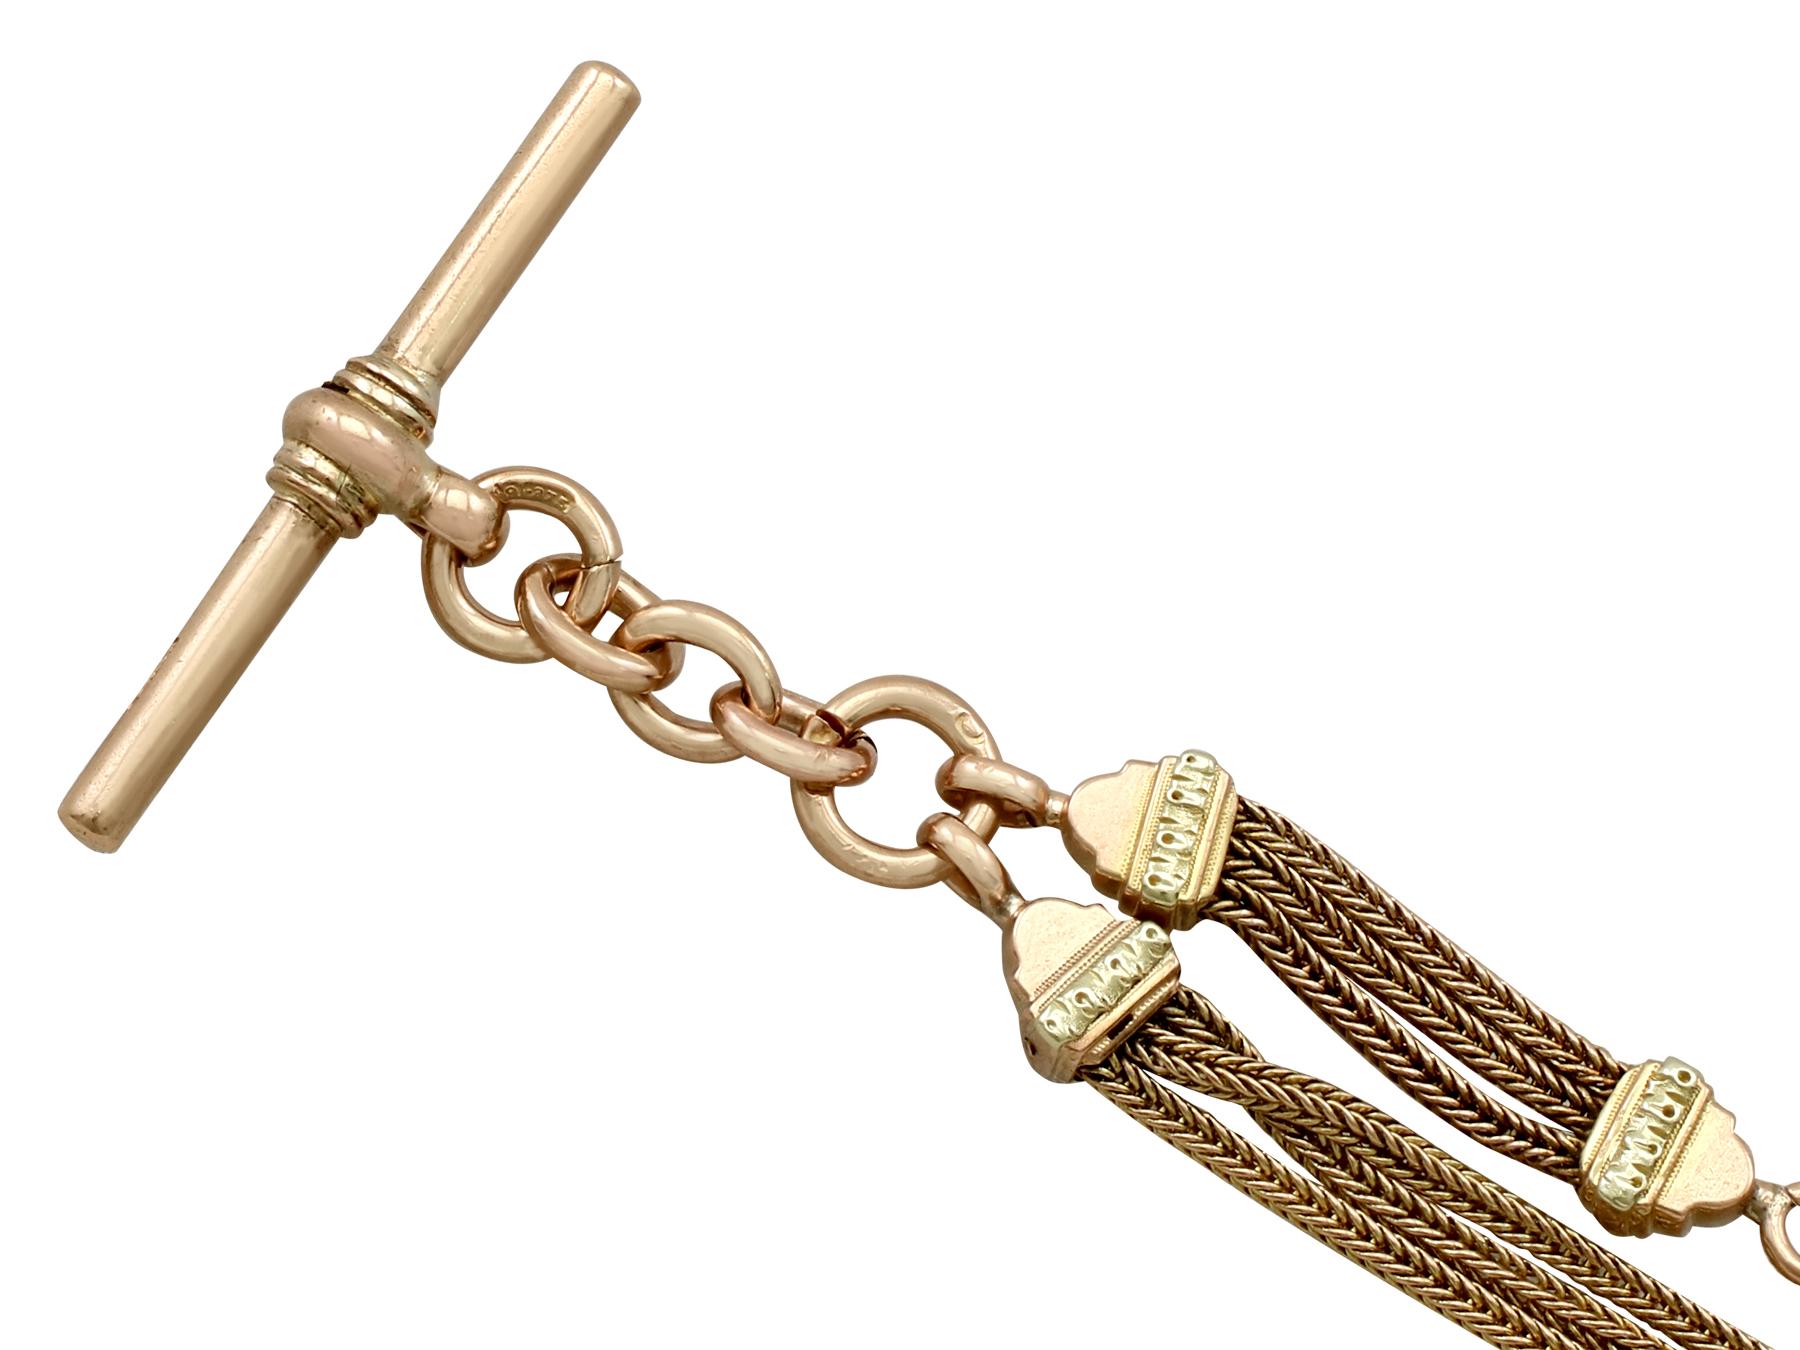 An impressive 'Albertina' chain crafted in 9k rose gold, 14 karat yellow and rose gold; part of our diverse antique jewellery and estate jewelry collections.

This exceptional, fine and impressive antique watch chain has been crafted in 14k yellow